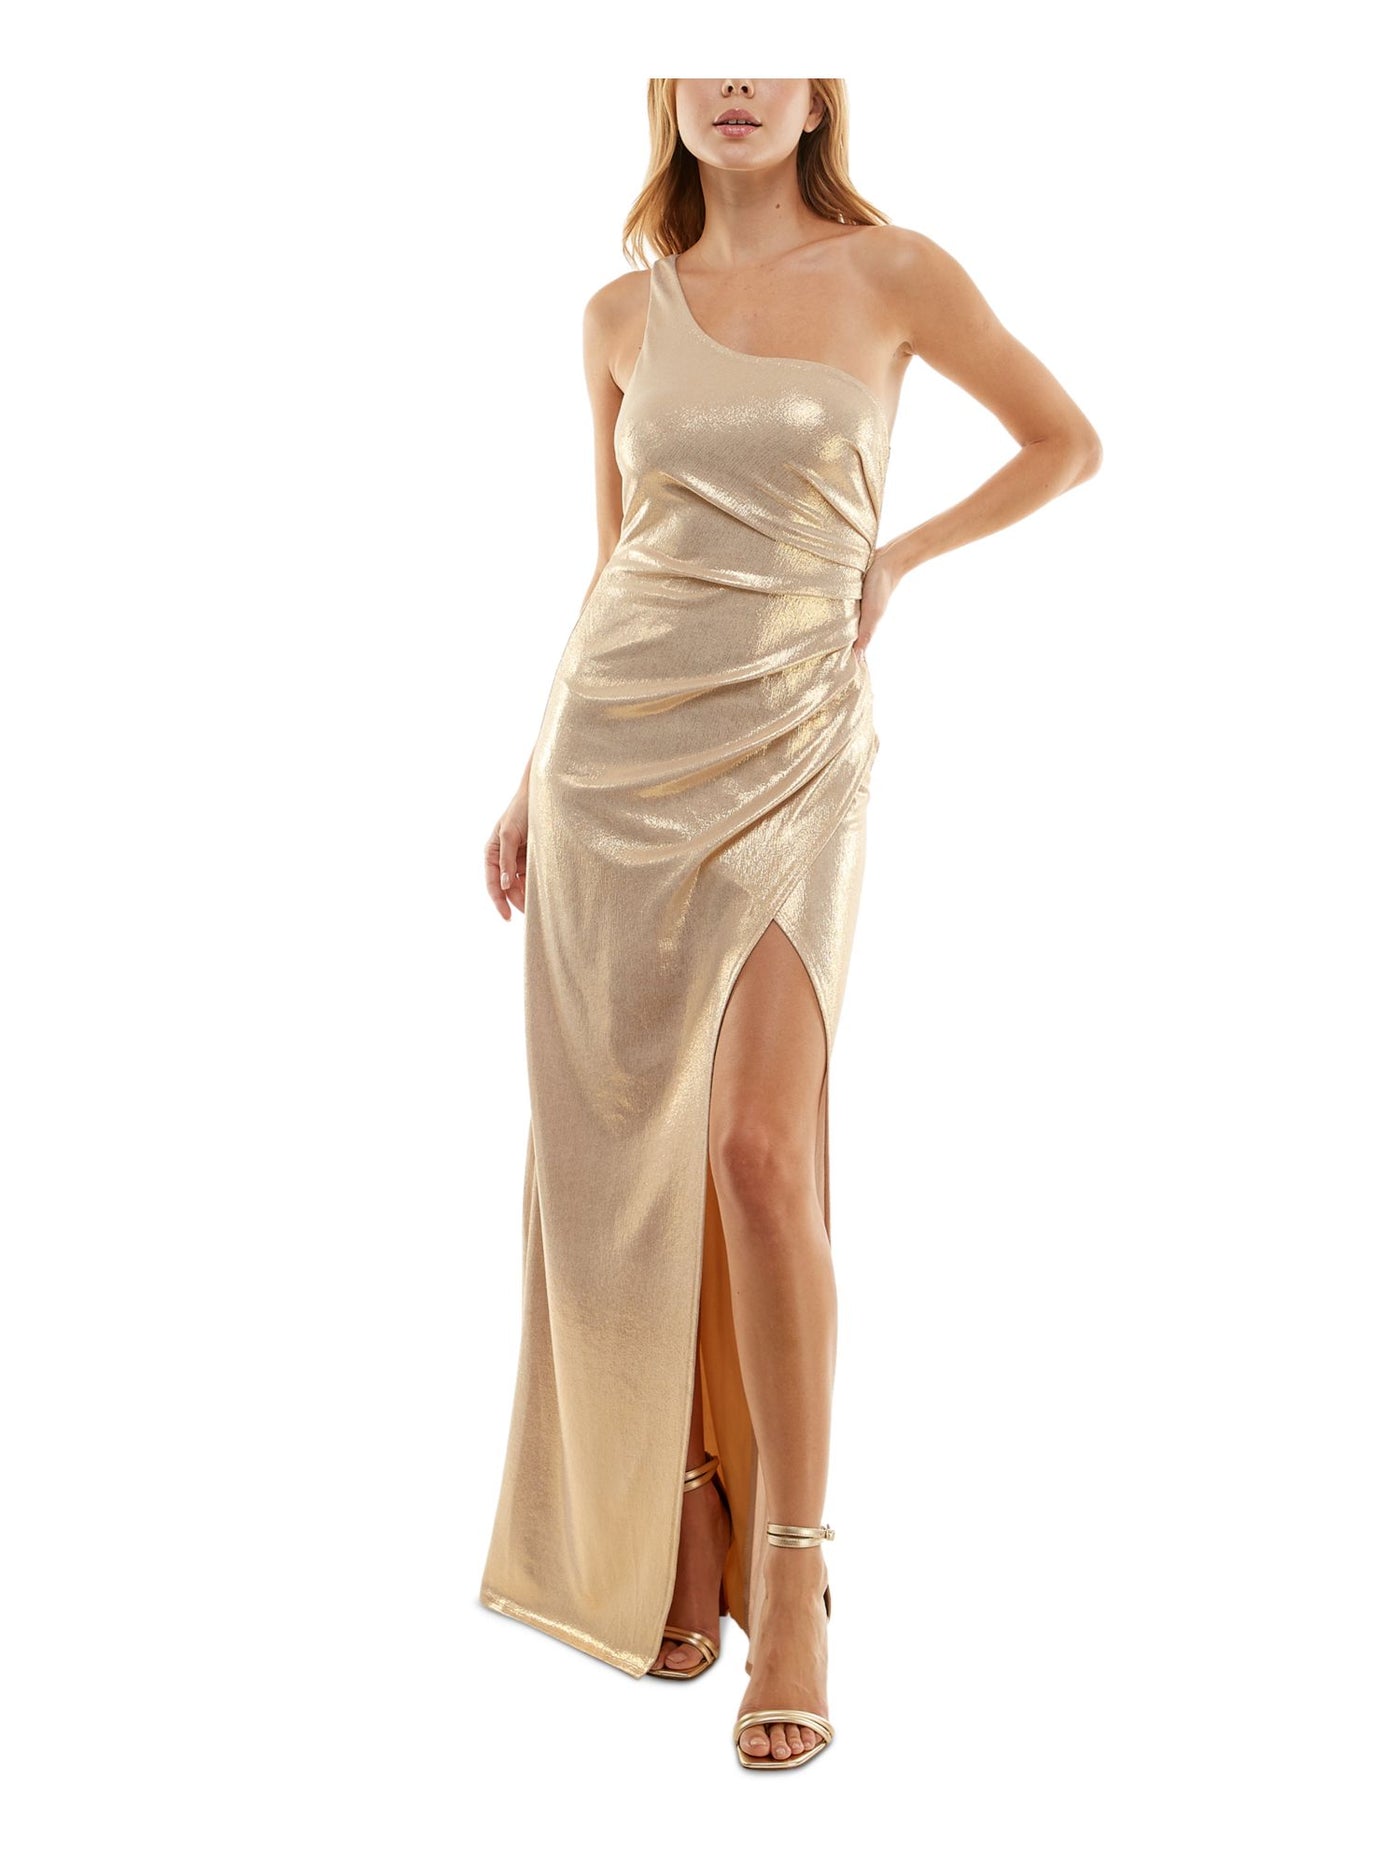 CITY STUDIO Womens Gold Ruched Zippered Slit Lined Open Strappy Back Sleeveless Asymmetrical Neckline Full-Length Party Gown Dress Juniors 1